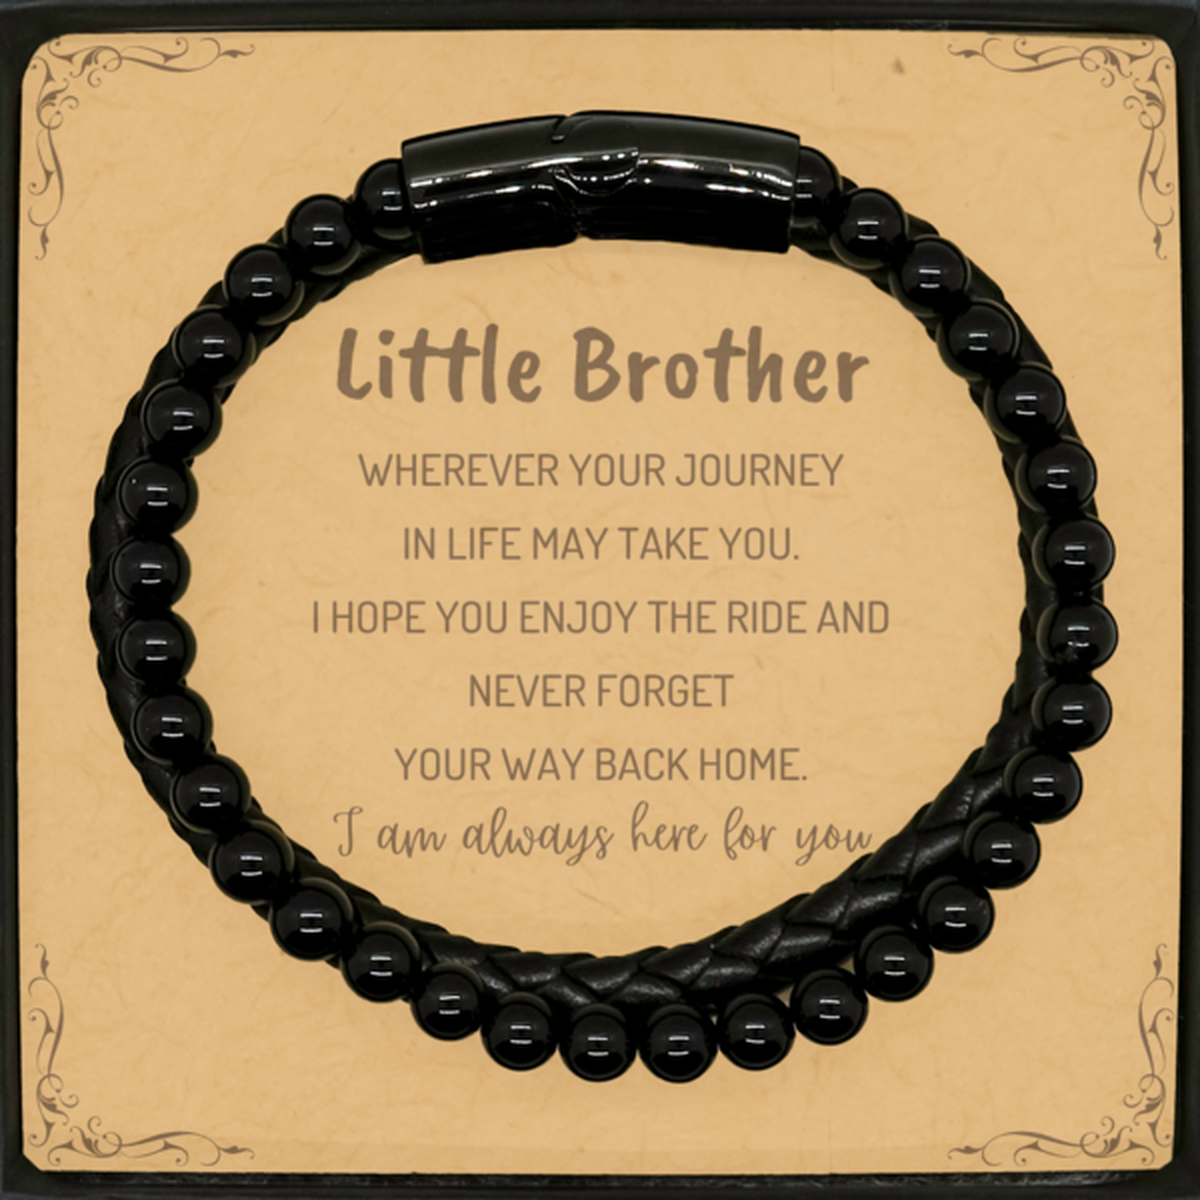 Little Brother wherever your journey in life may take you, I am always here for you Little Brother Stone Leather Bracelets, Awesome Christmas Gifts For Little Brother Message Card, Little Brother Birthday Gifts for Men Women Family Loved One